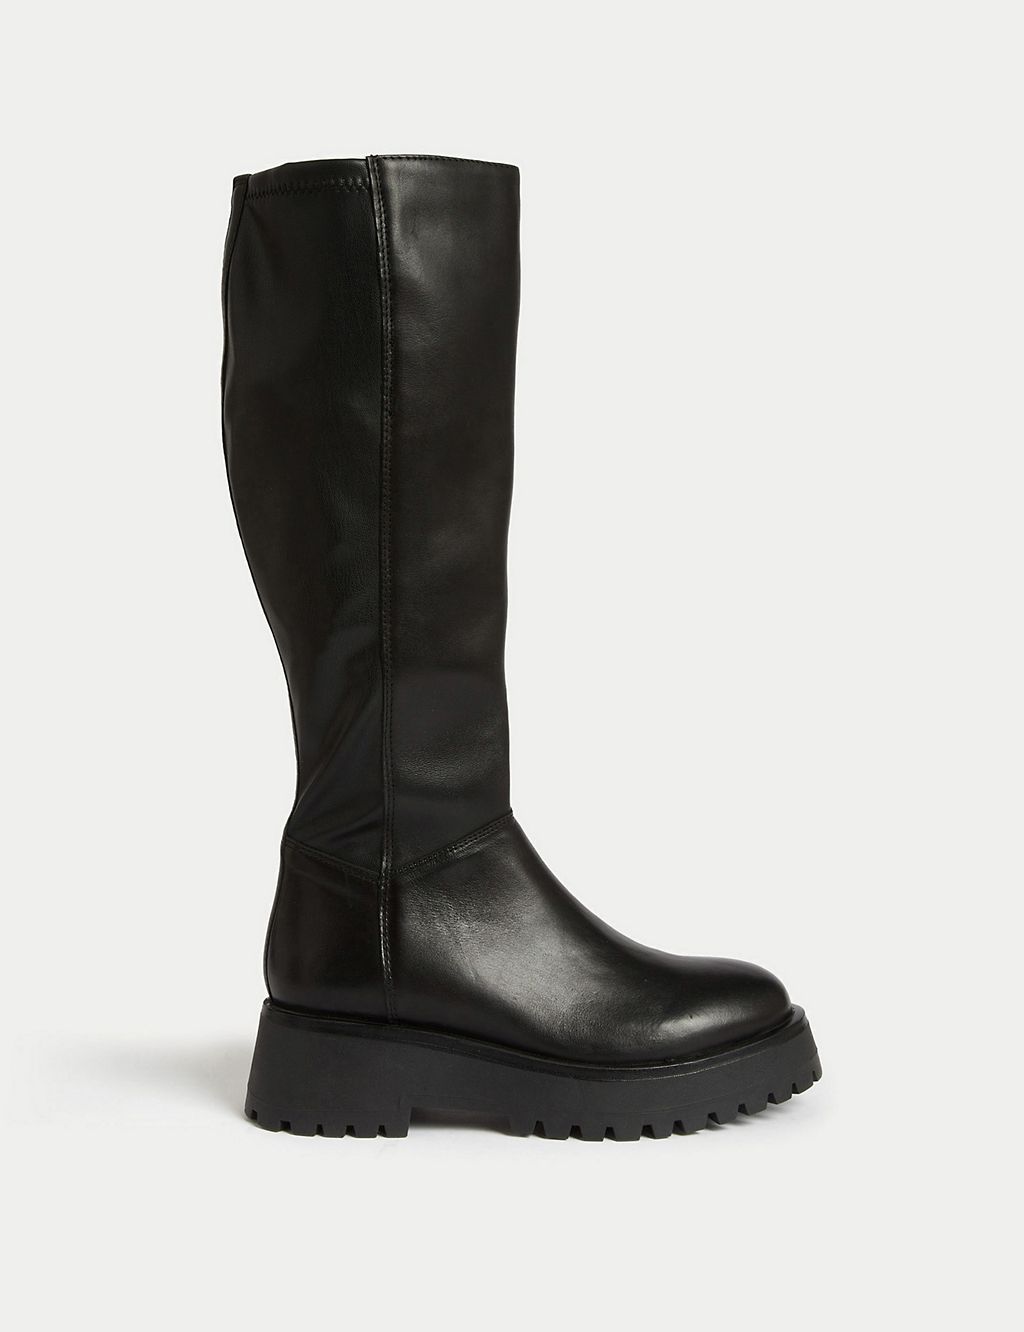 Leather Chunky Flatform Knee High Boots | M&S Collection | M&S